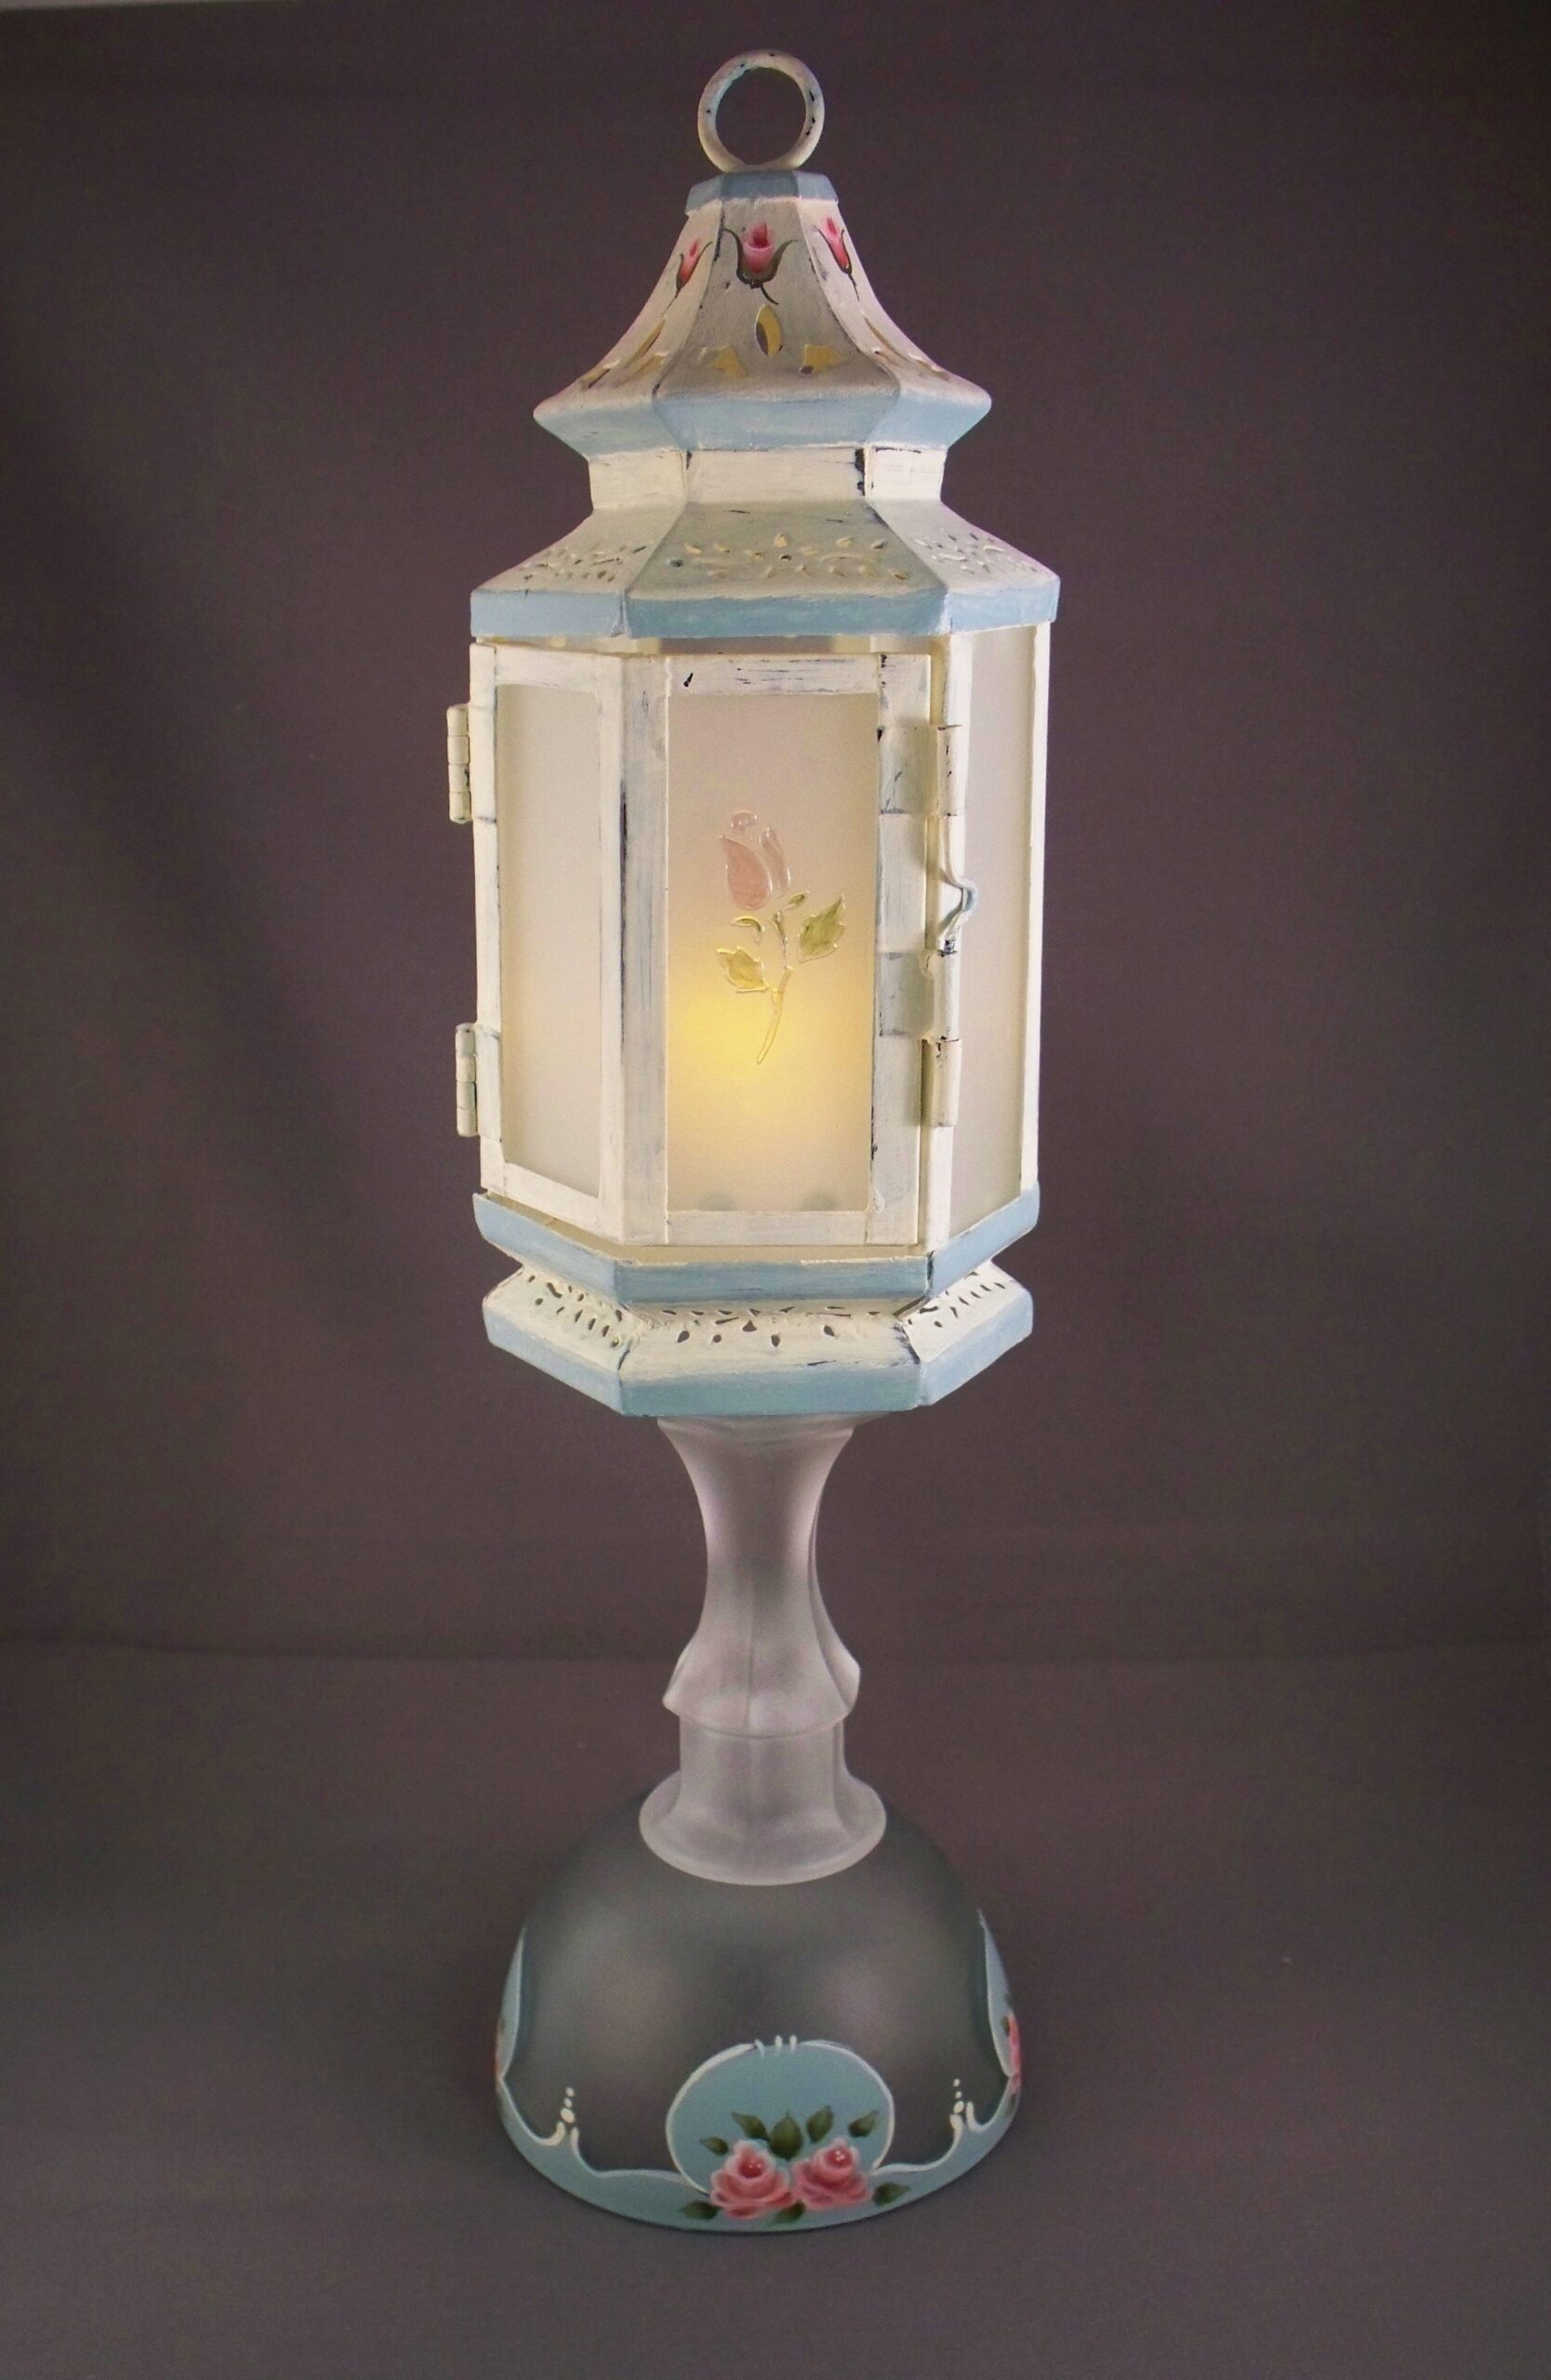 Etched Shabby Chic Lantern – Roses